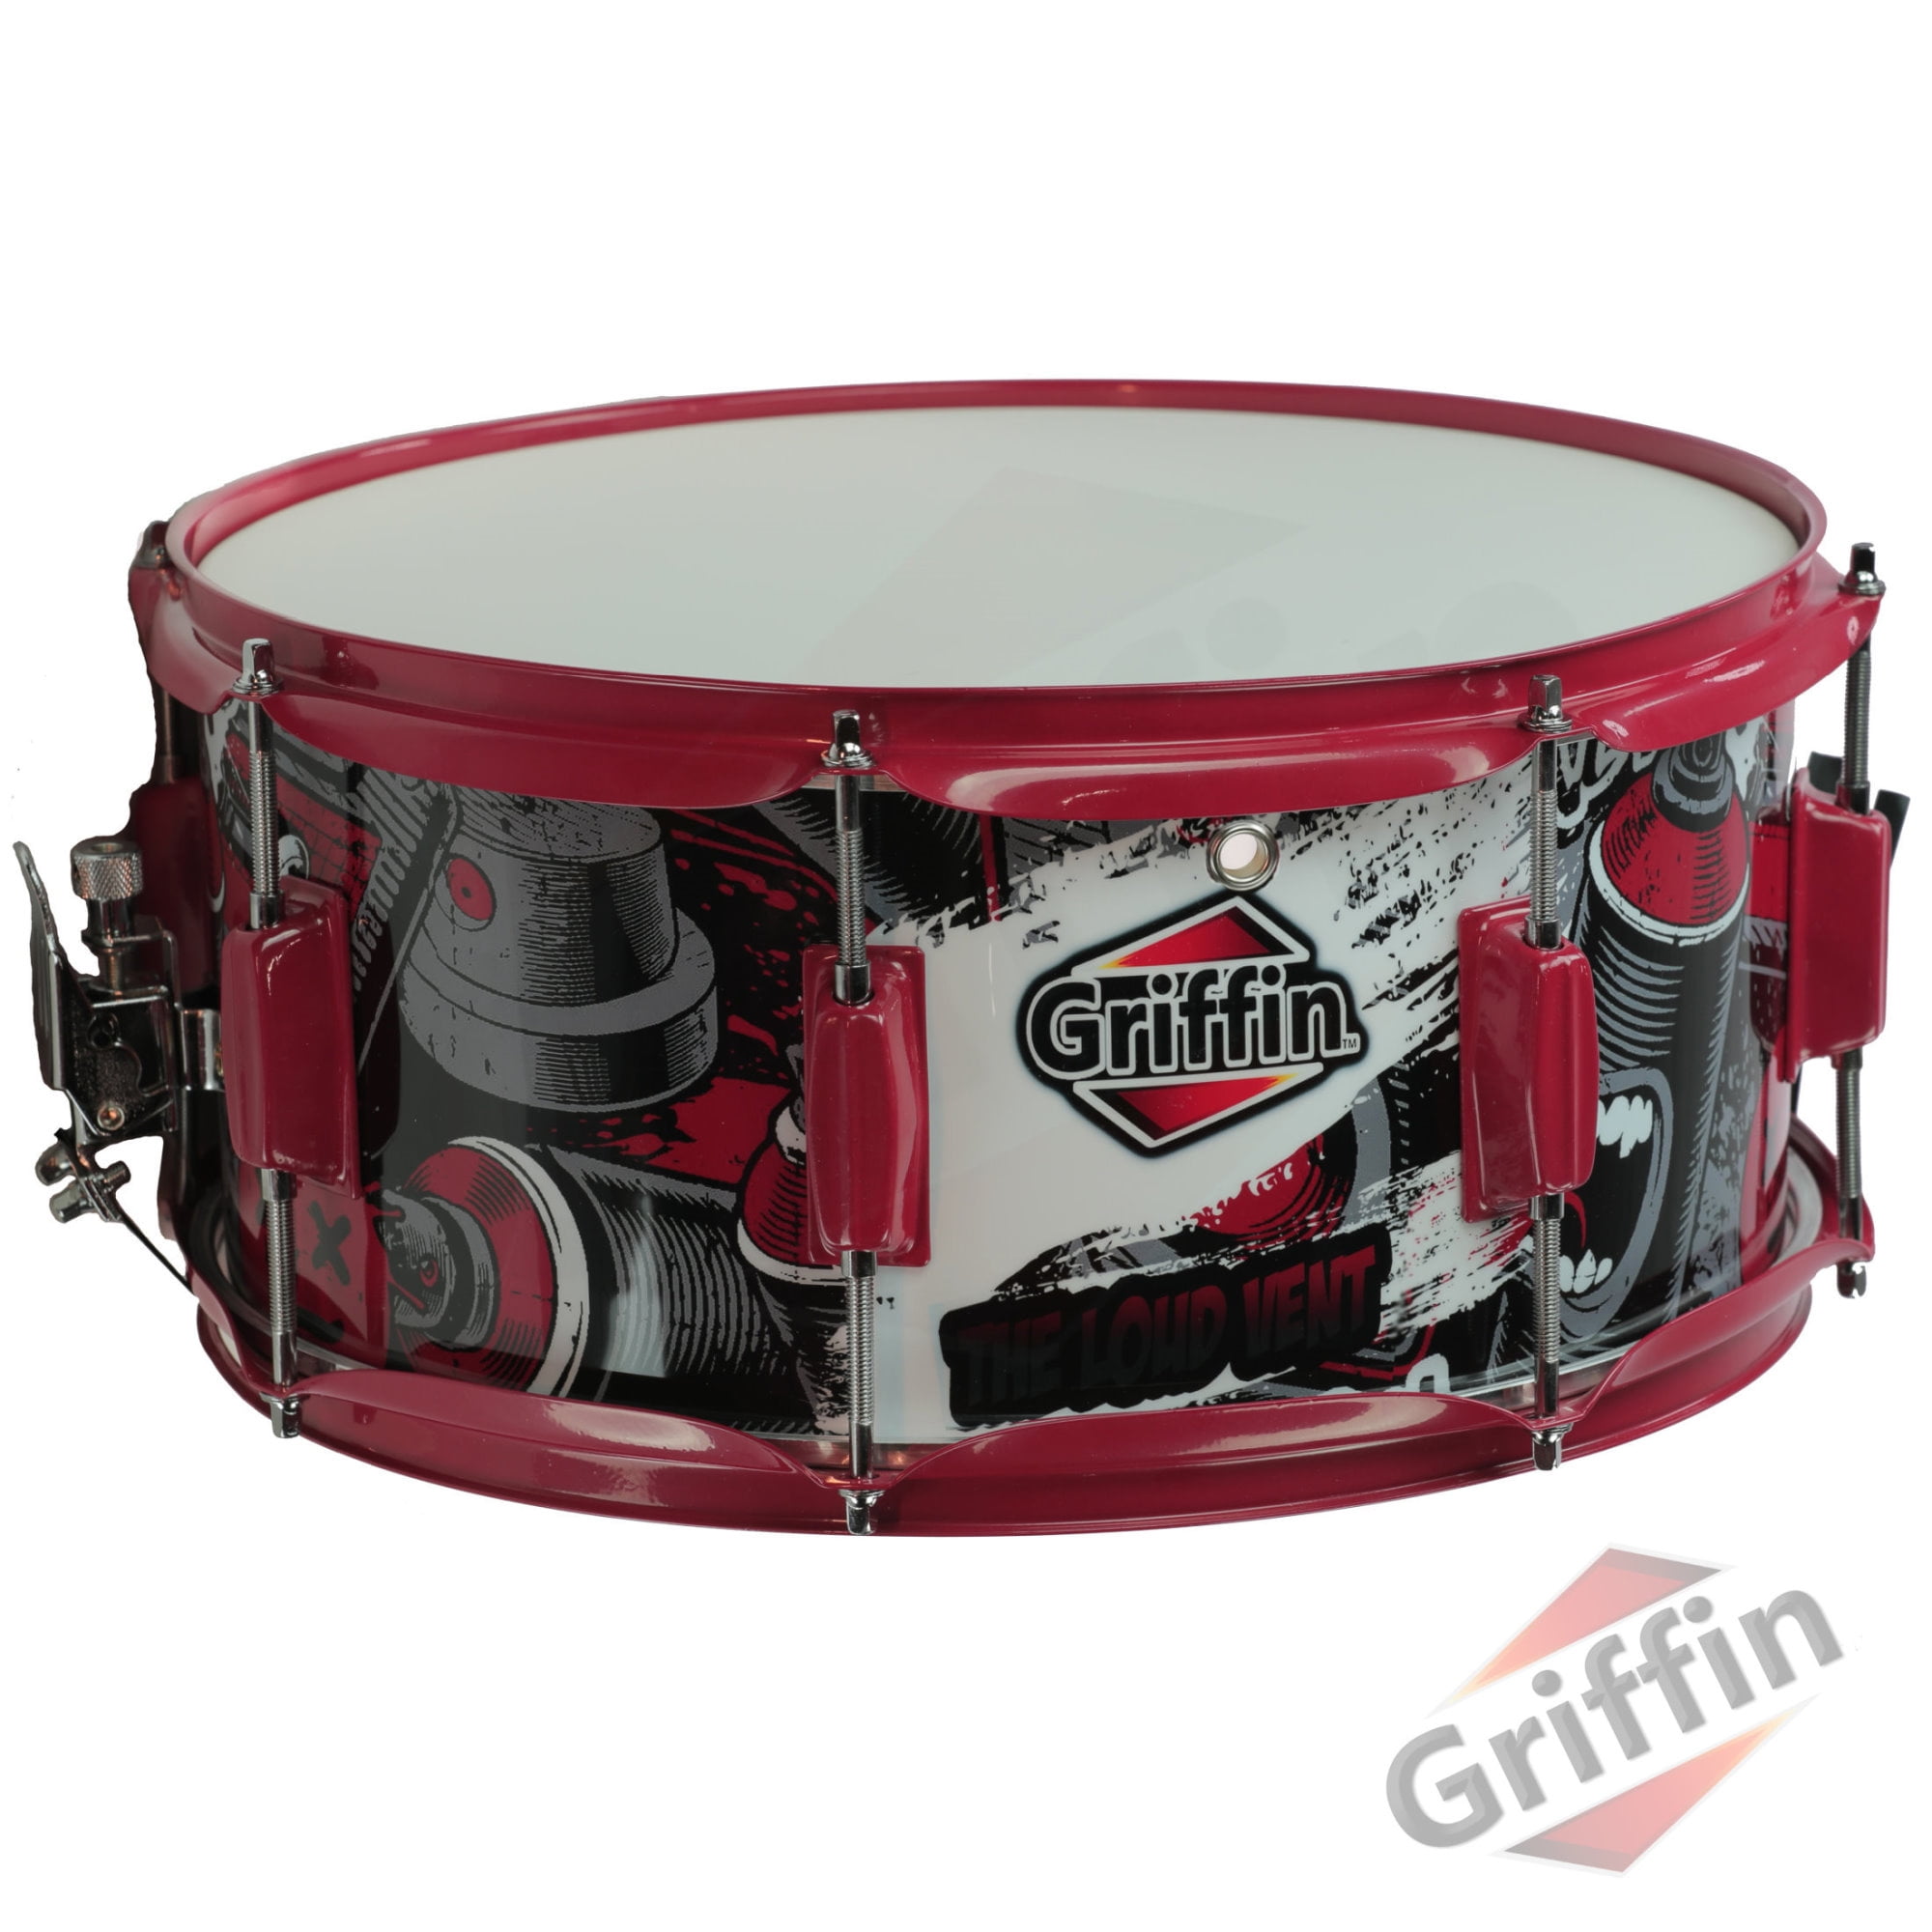 Limited Edition | Percussion Acoustic Musical Instrument Kit & Drummers Key 8 Metal Lugs Snare Drum by GRIFFIN Head Set & Strainer Throw Off Birch Wood Shell 14x6.5 with Custom Graphic Wrap 